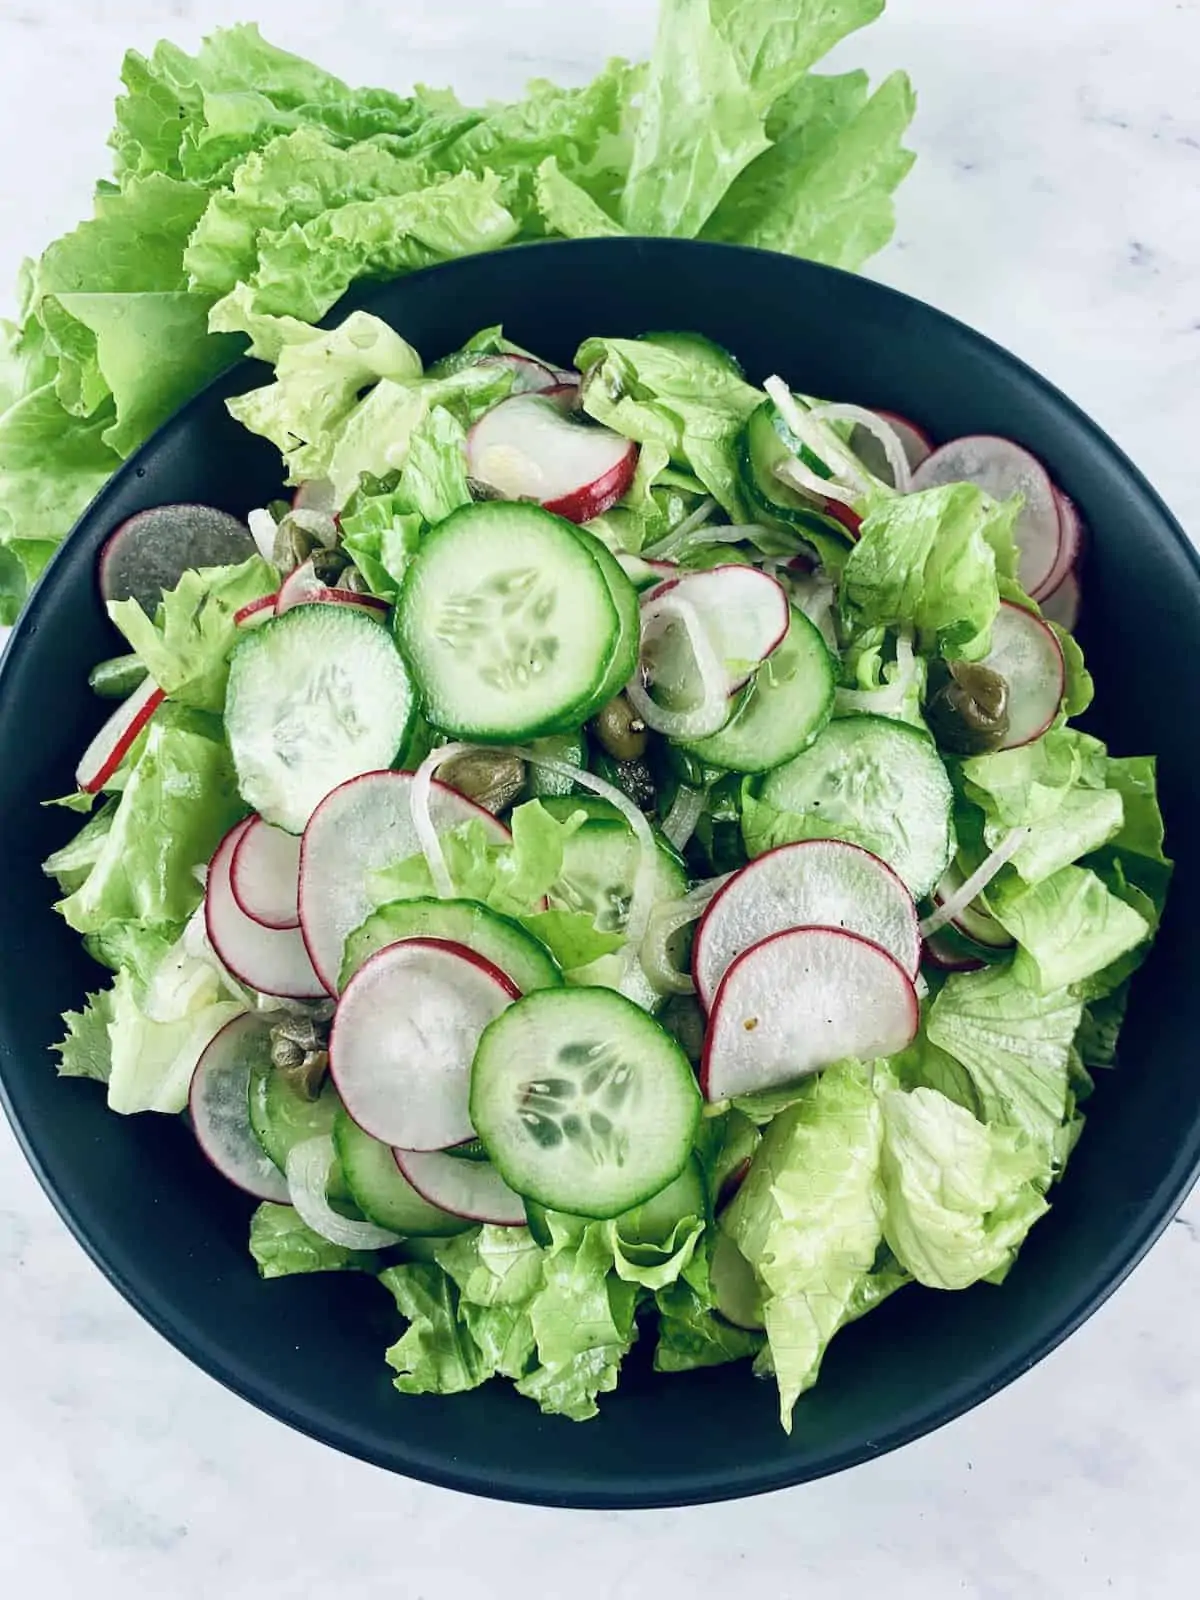 xRadish Green Salad in a black bowl with lettuce leaves up top.